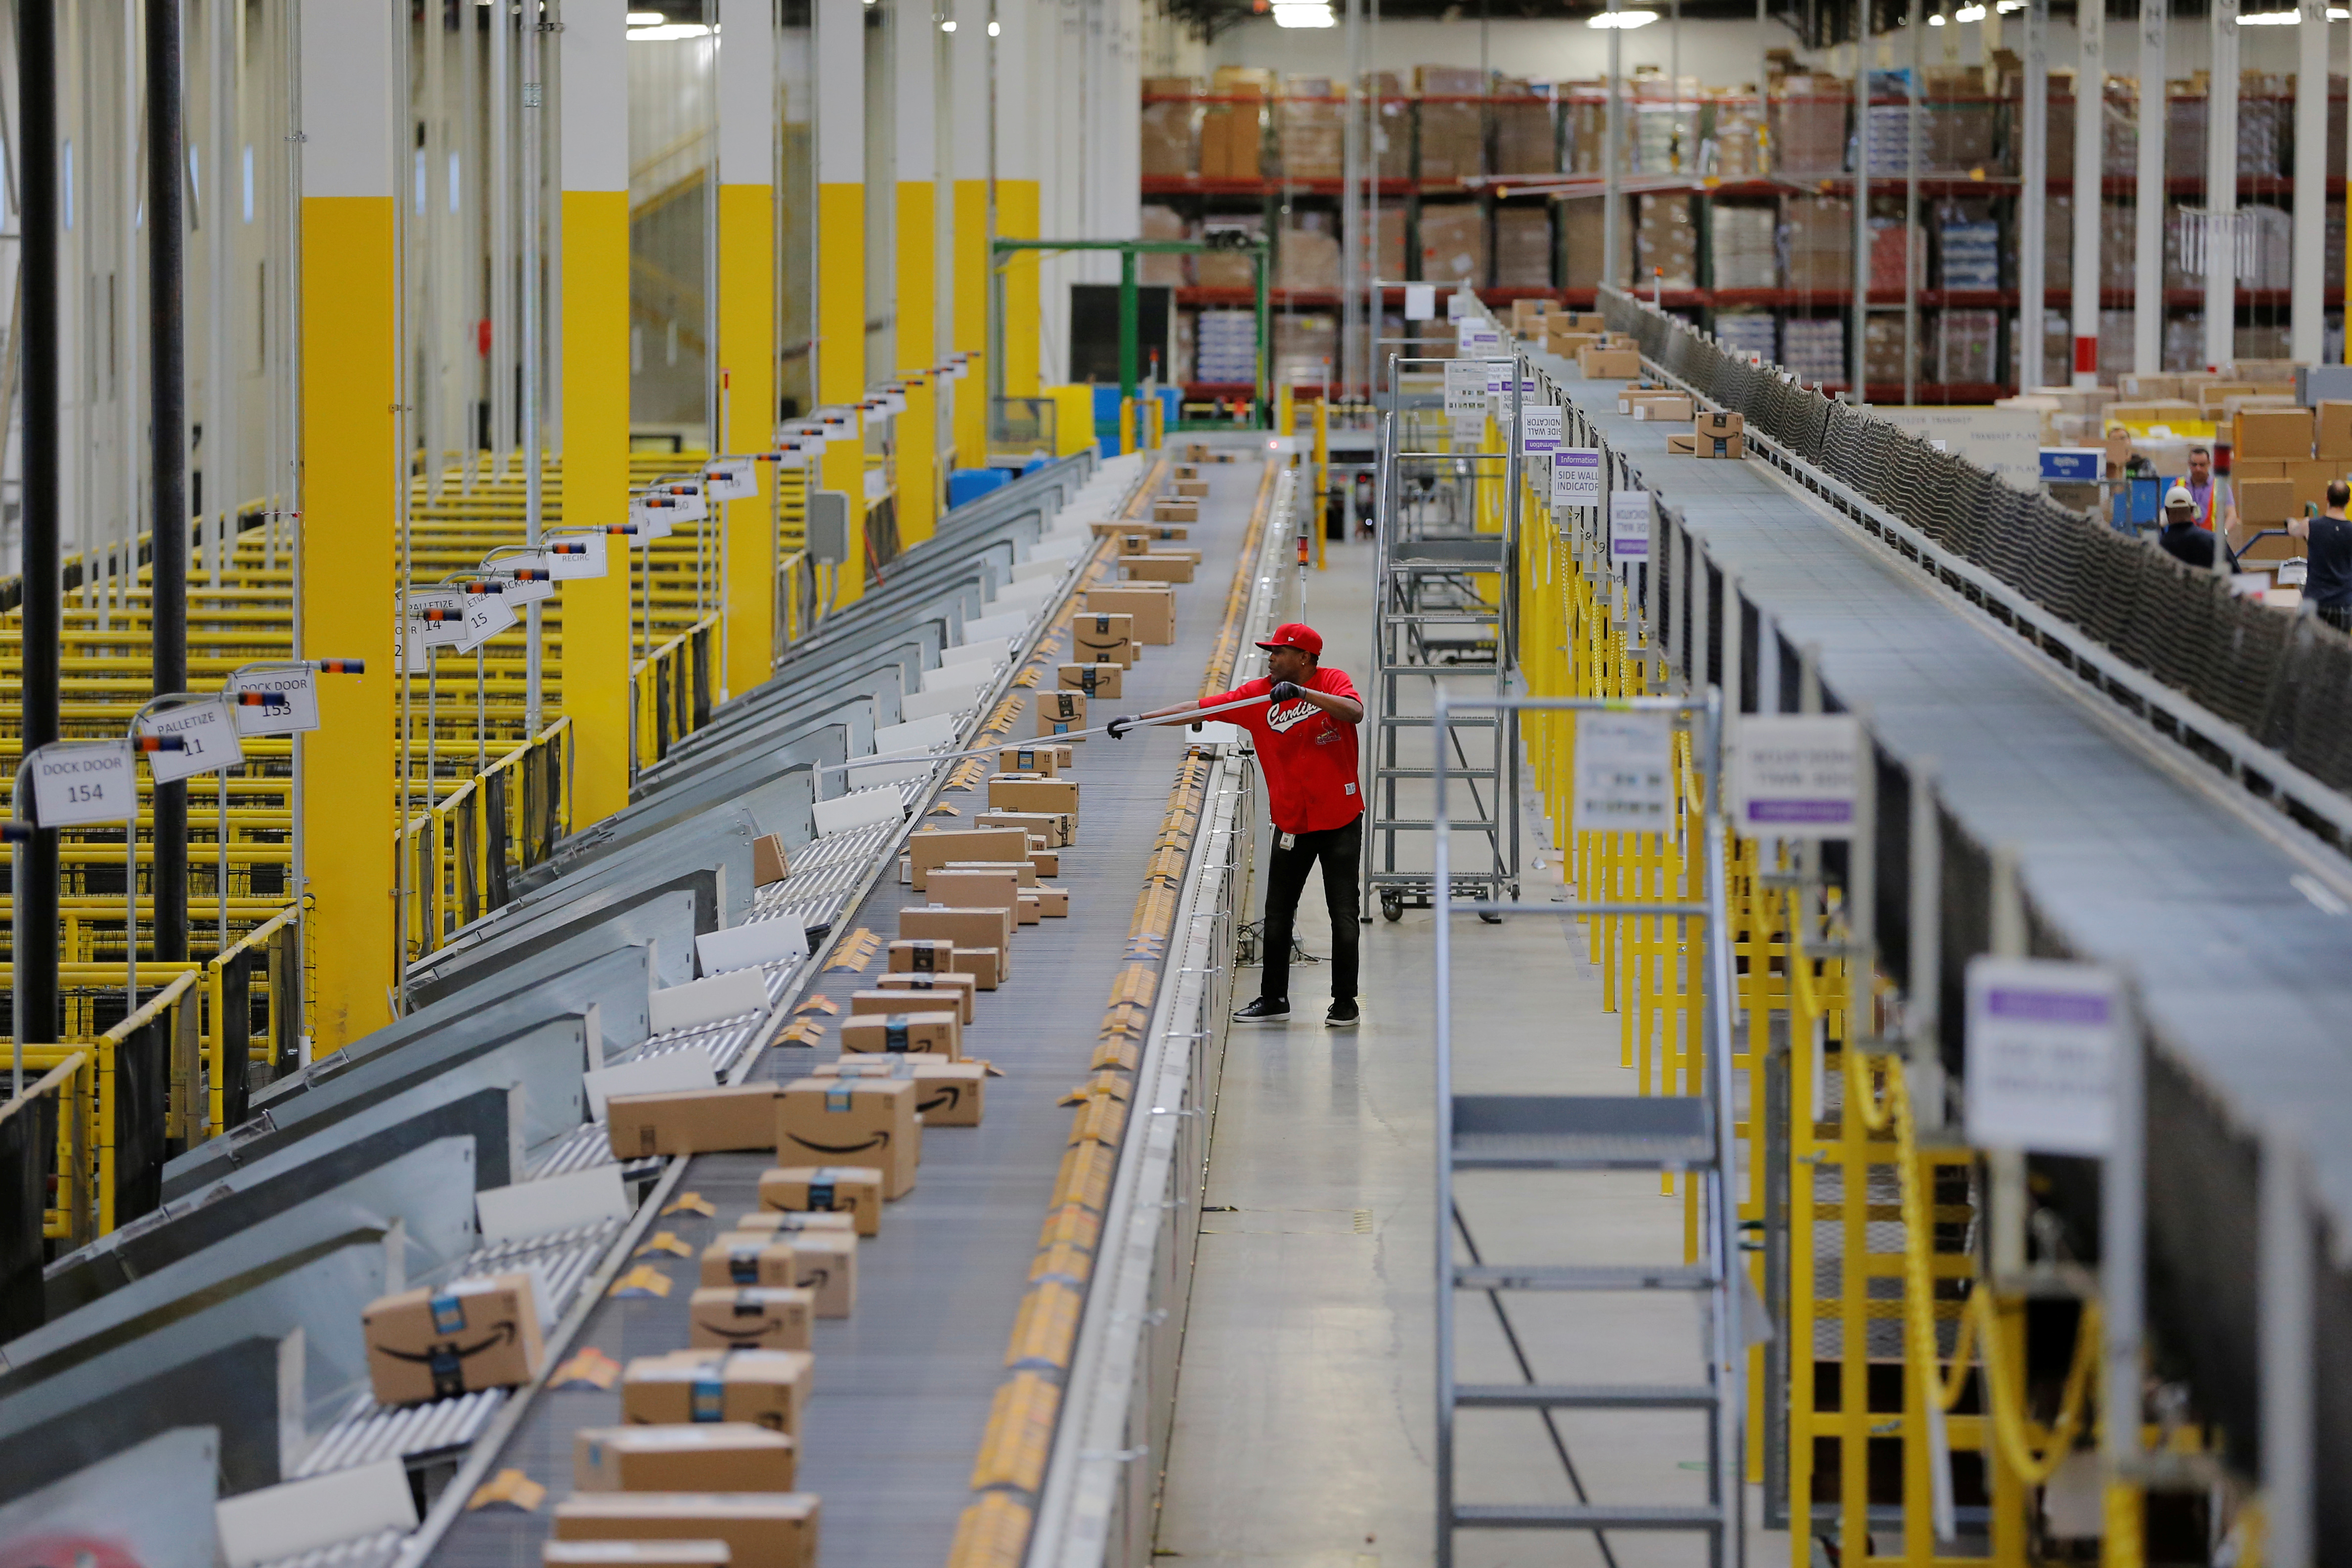 A worker clears a machine jam inside of an Amazon fulfillment center in Robbinsville, New Jersey